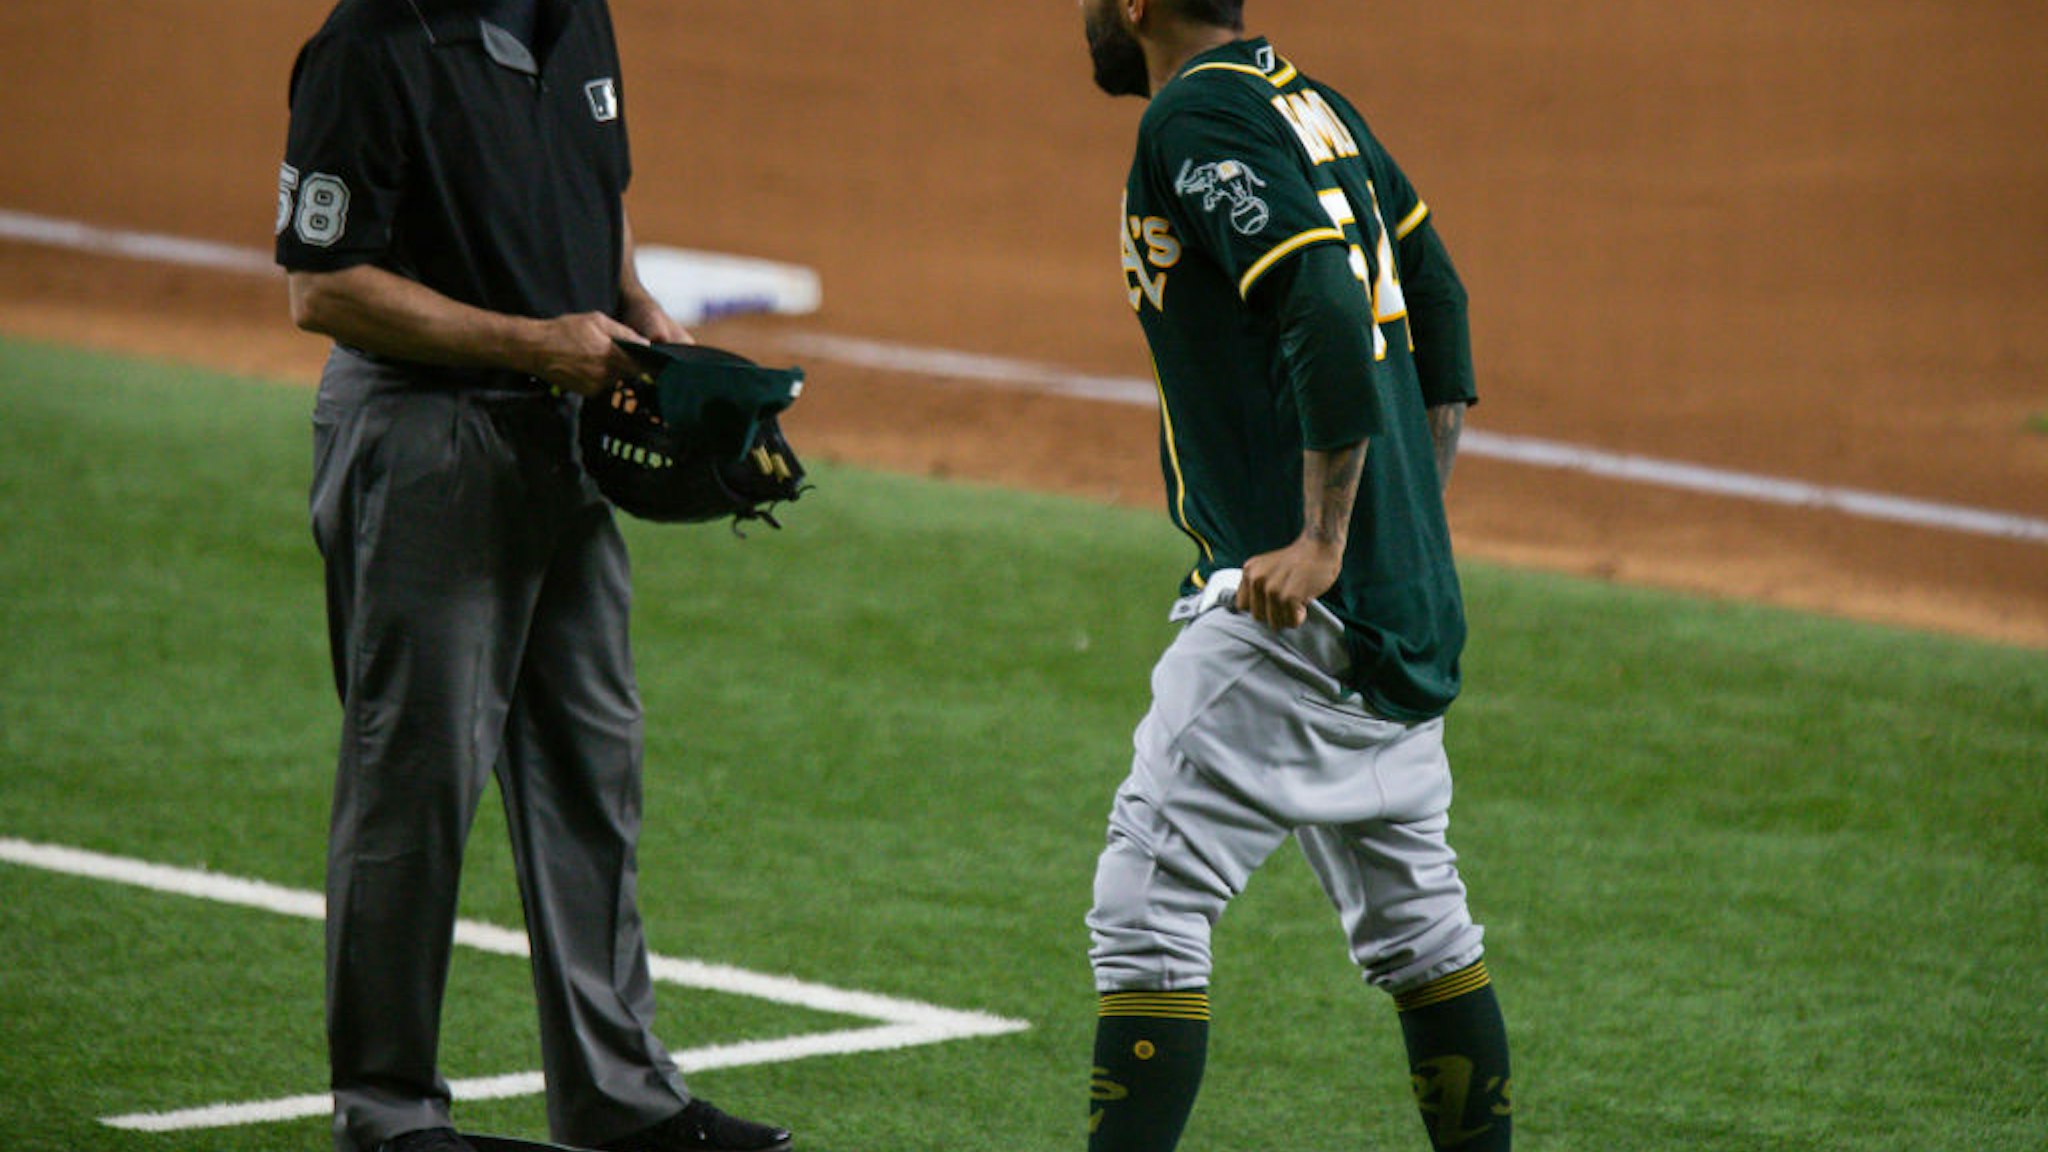 ARLINGTON, TX - JUNE 22: Oakland Athletics Pitcher Sergio Romo (54) gives third base umpire Dan Iassogna his hat, glove, and belt to check and pulls down his pants during the Texas Rangers game versus the Oakland Athletics on Jun 22nd, 2021, at Globe Life Field in Arlington, TX. (Photo by Aric Becker/Icon Sportswire via Getty Images)